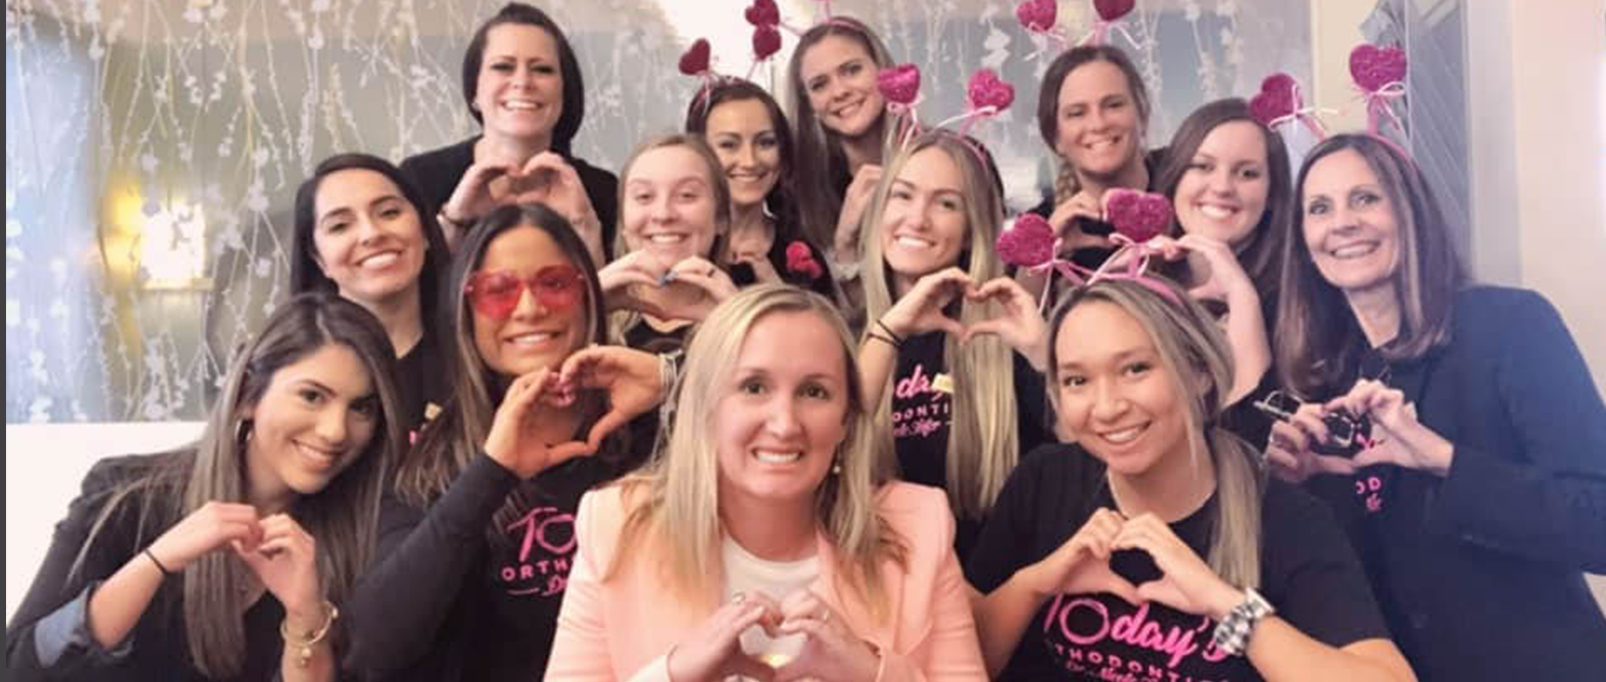 Today's Ortho Team smiling and holding up heart signs with hands